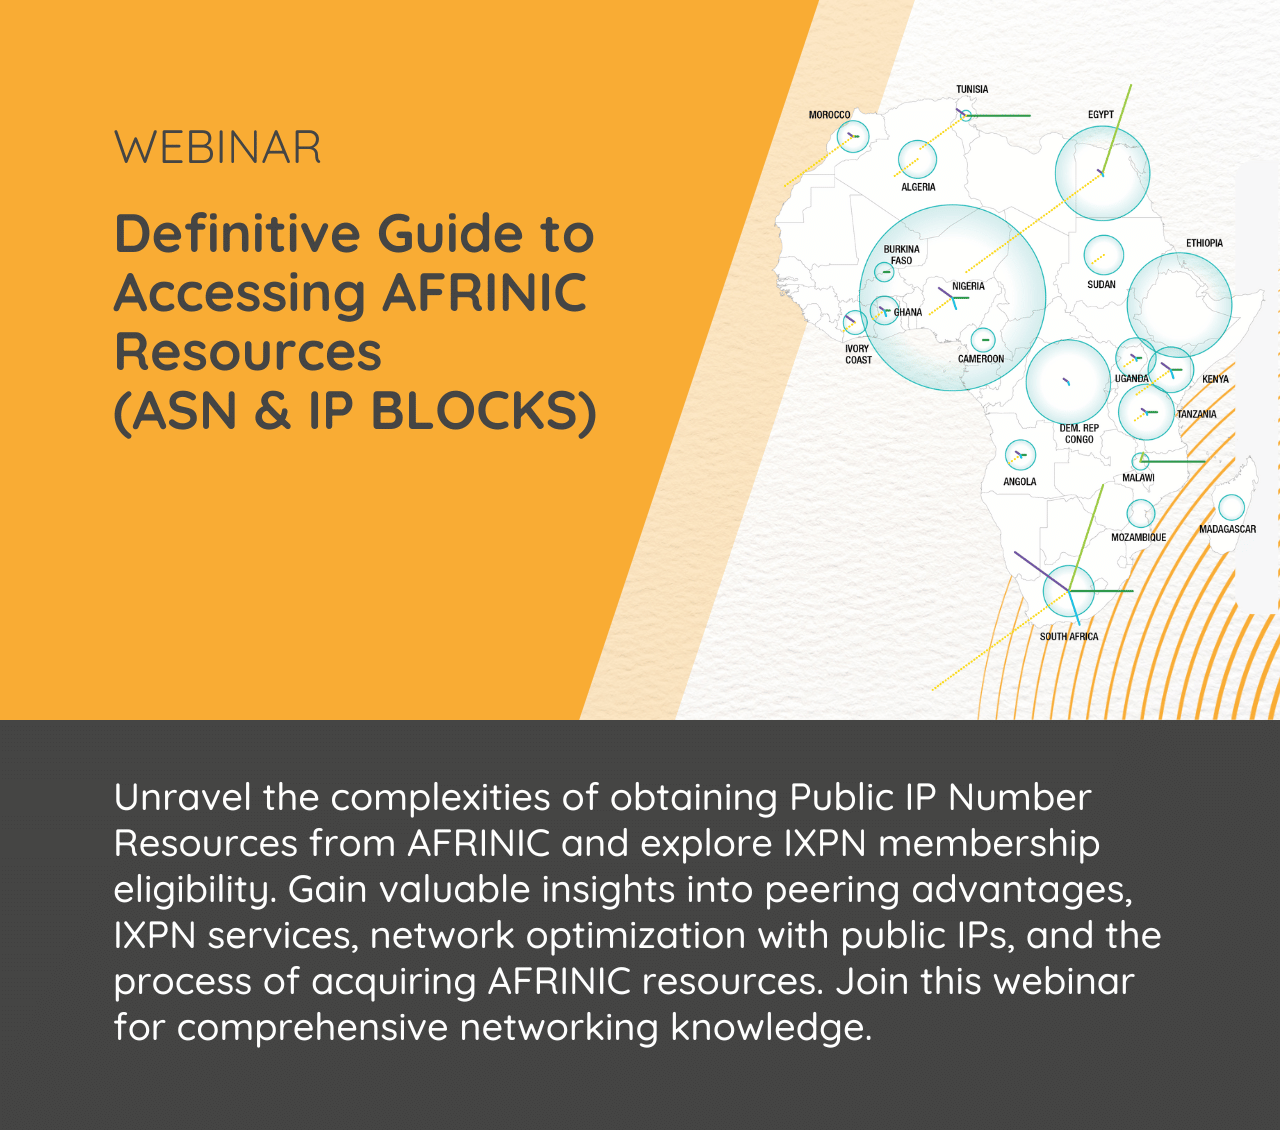 Definitive Guide to Accessing AFRINIC Resources (ASN & IP BLOCKS)